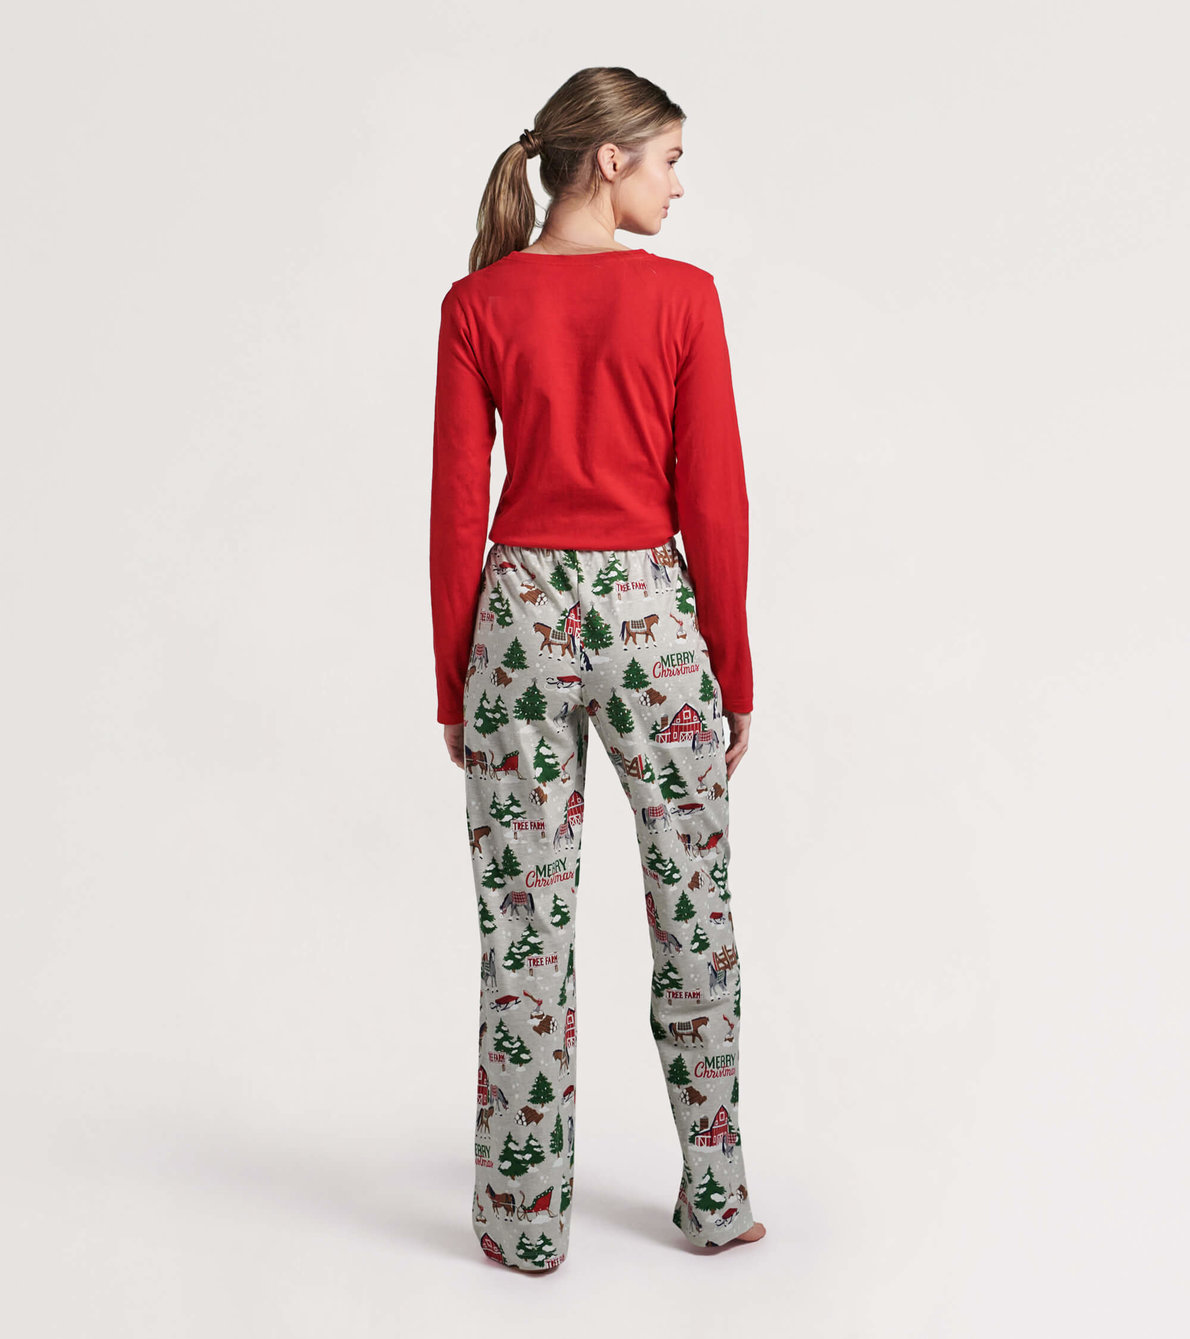 View larger image of Women's Country Christmas Jersey Pajama Pants